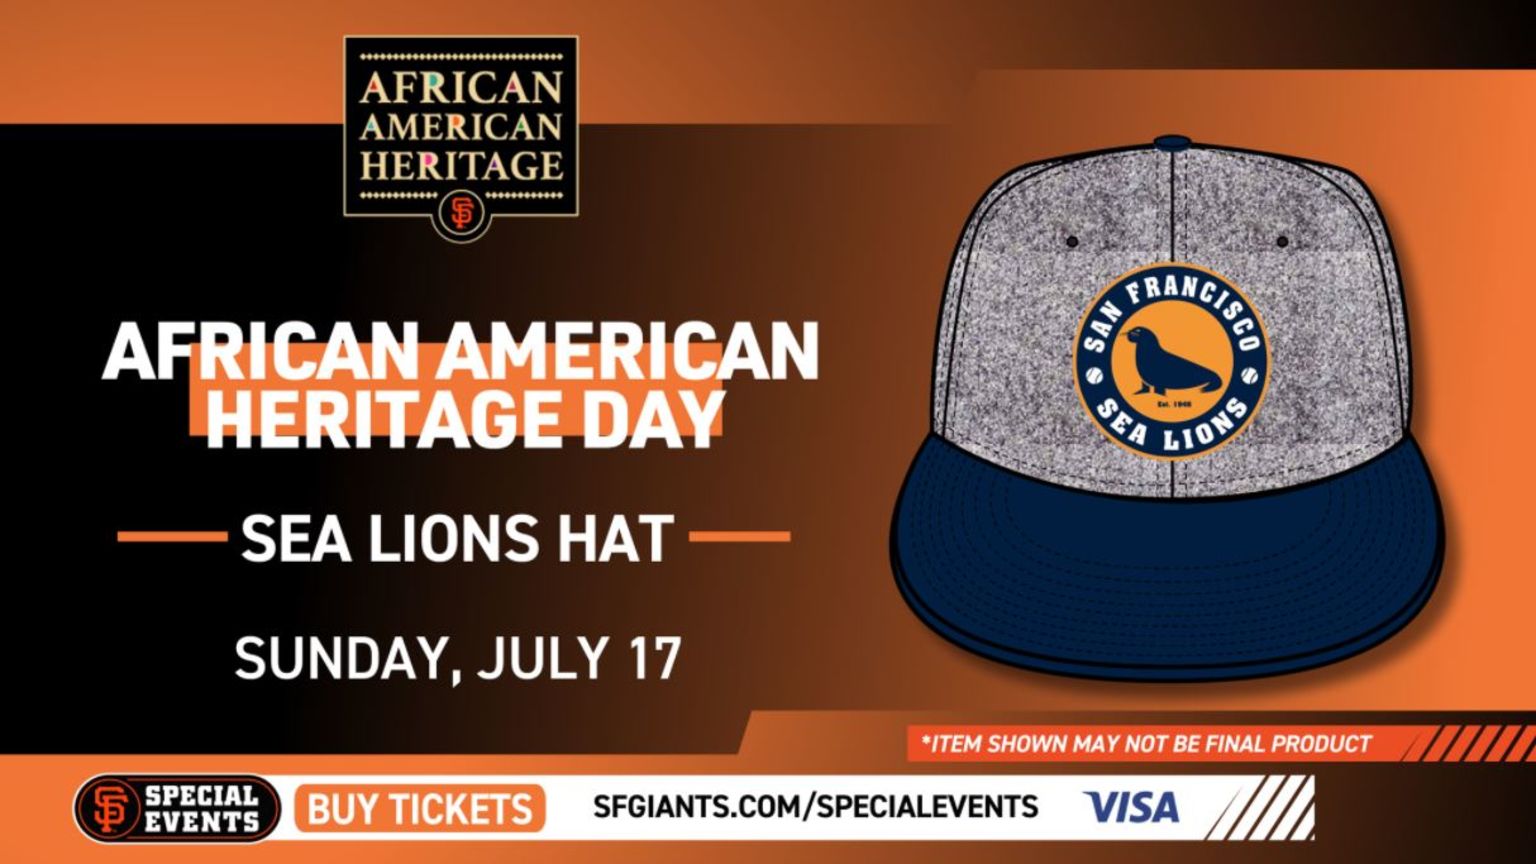 African American Heritage Night set for August 5